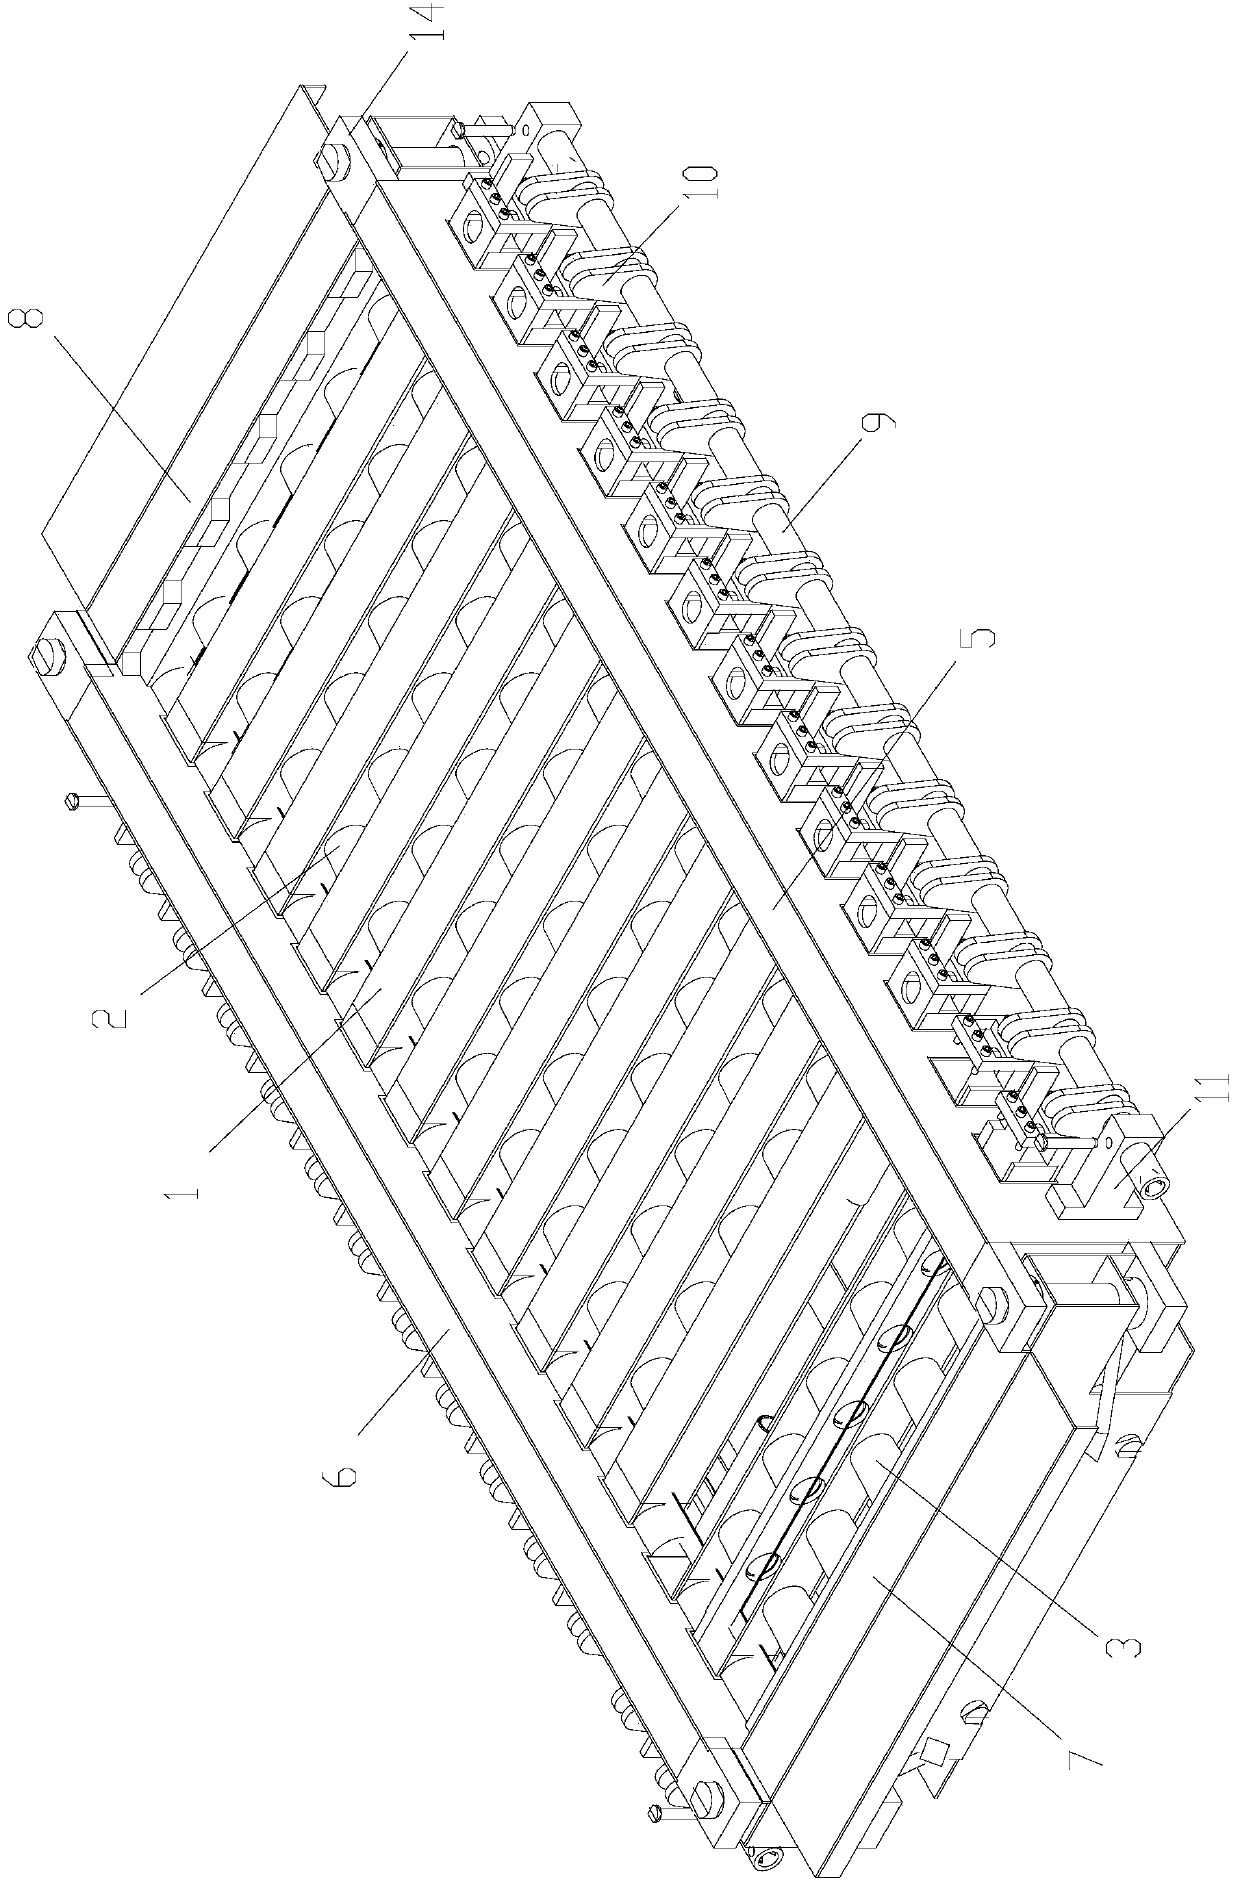 Prefabricated hollow reinforced concrete pouring formwork with cross holes inside and using method of pouring formwork